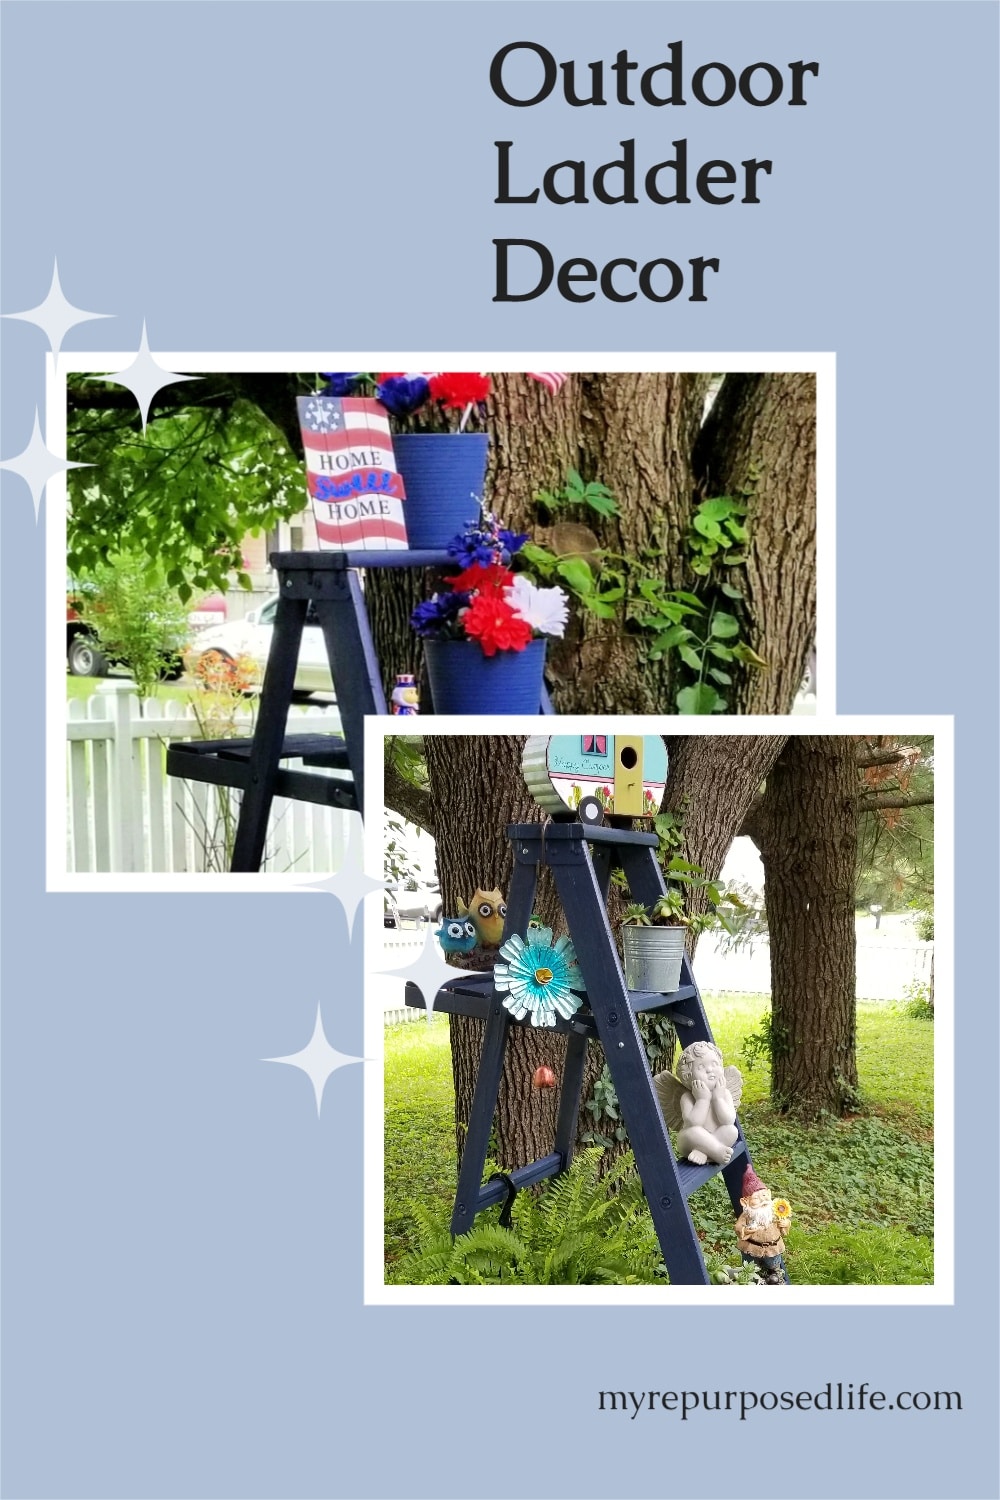 An old ladder with fresh paint and fun decor is a perfect way to add color to your porch, patio, or garden. Change it up several times during the summer, always a fresh look. #myrepurposedlife #upcycle #ladder #garden #decor #4thofJuly #patriotic via @repurposedlife